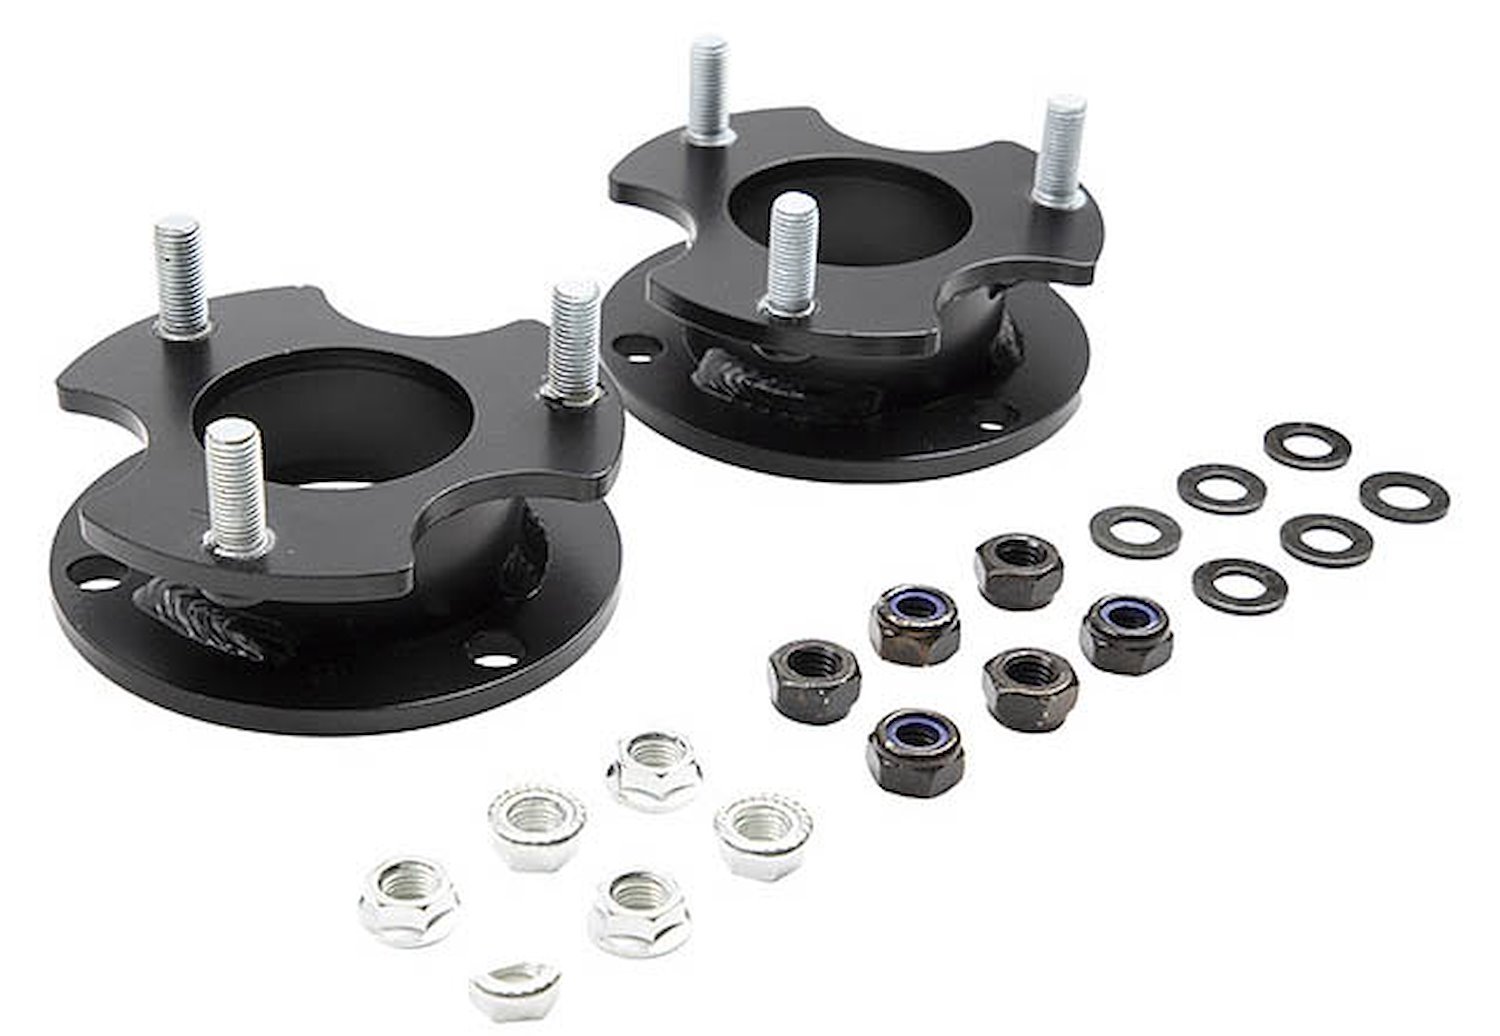 Front Leveling Strut Spacers 2019-2020 Ford Ranger XL/XLT/Lariat/FX4 2.3L, 2WD/4WD - 2.500 in. Lift